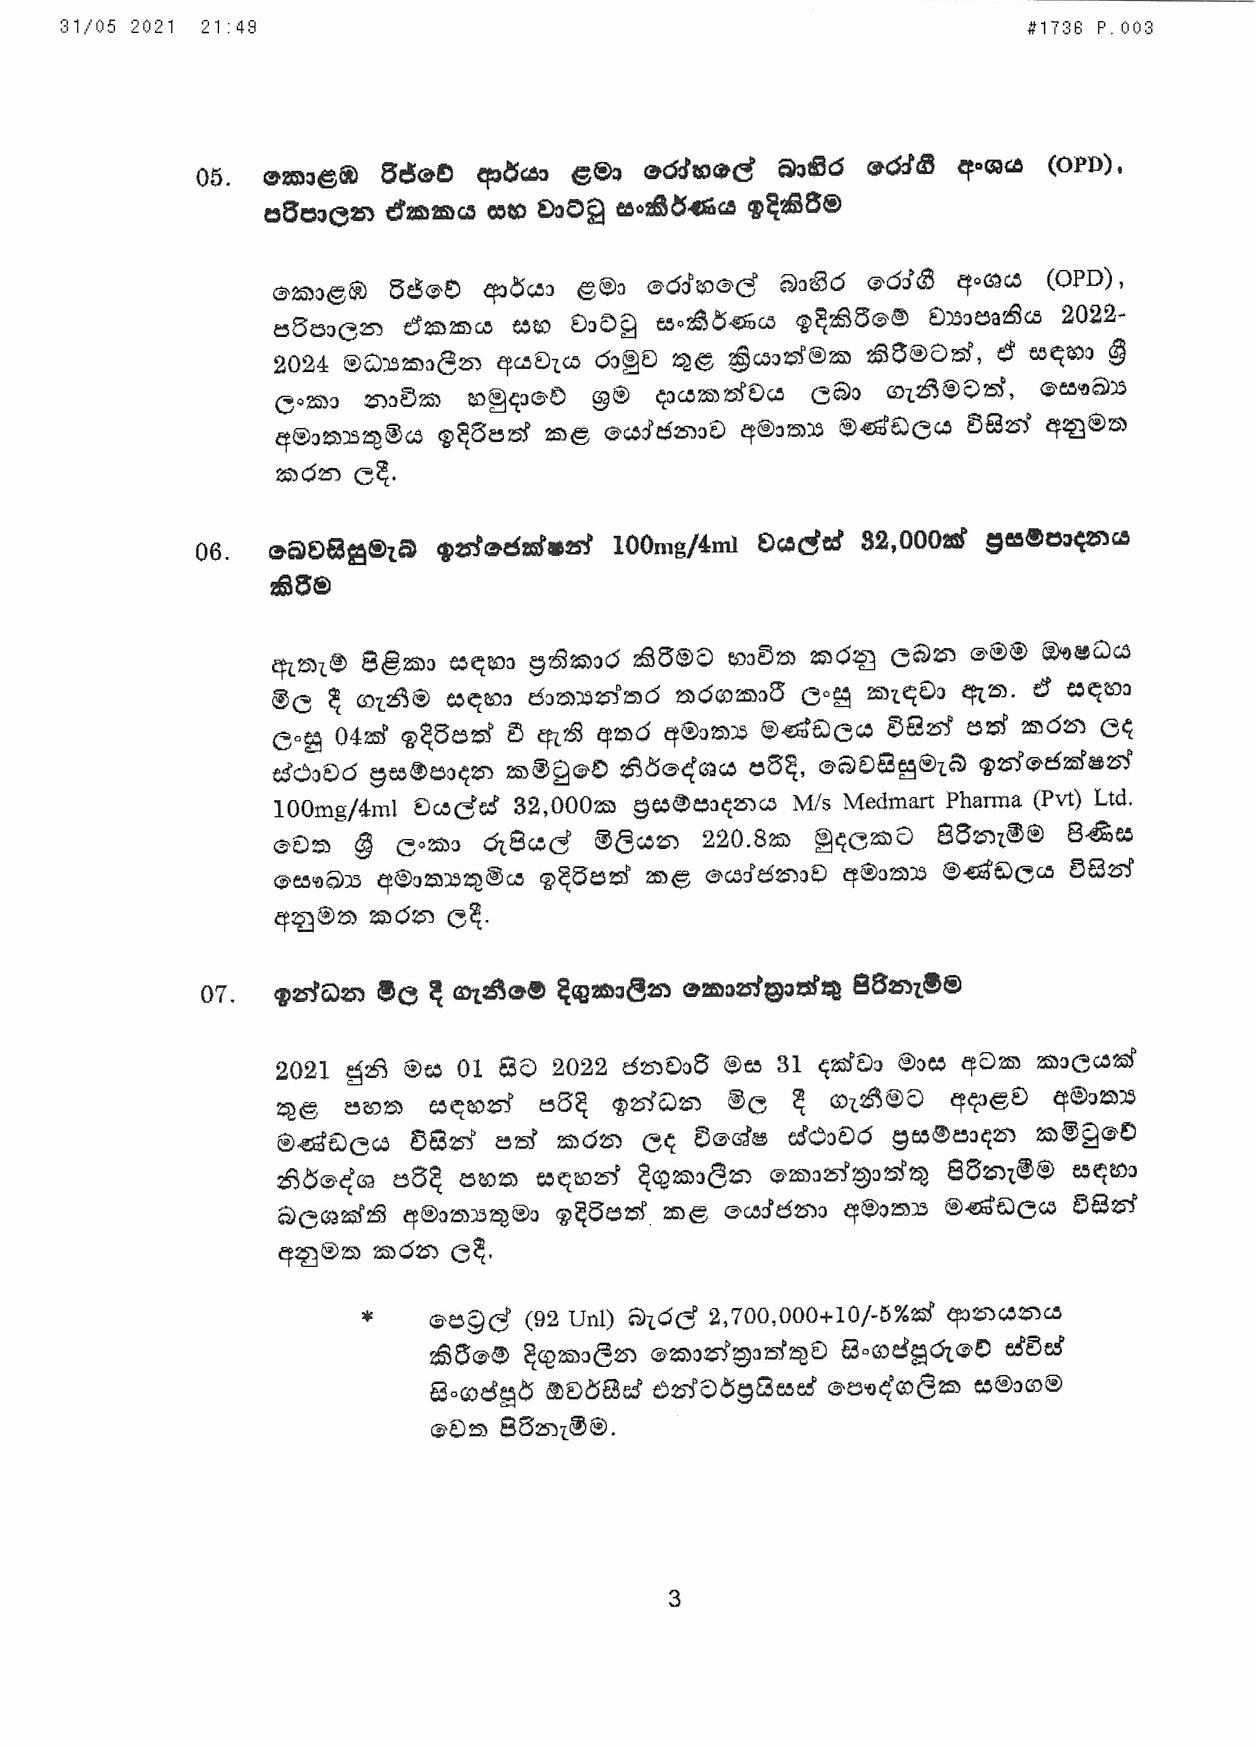 Cabinet Decision on 31.05.2021 page 003